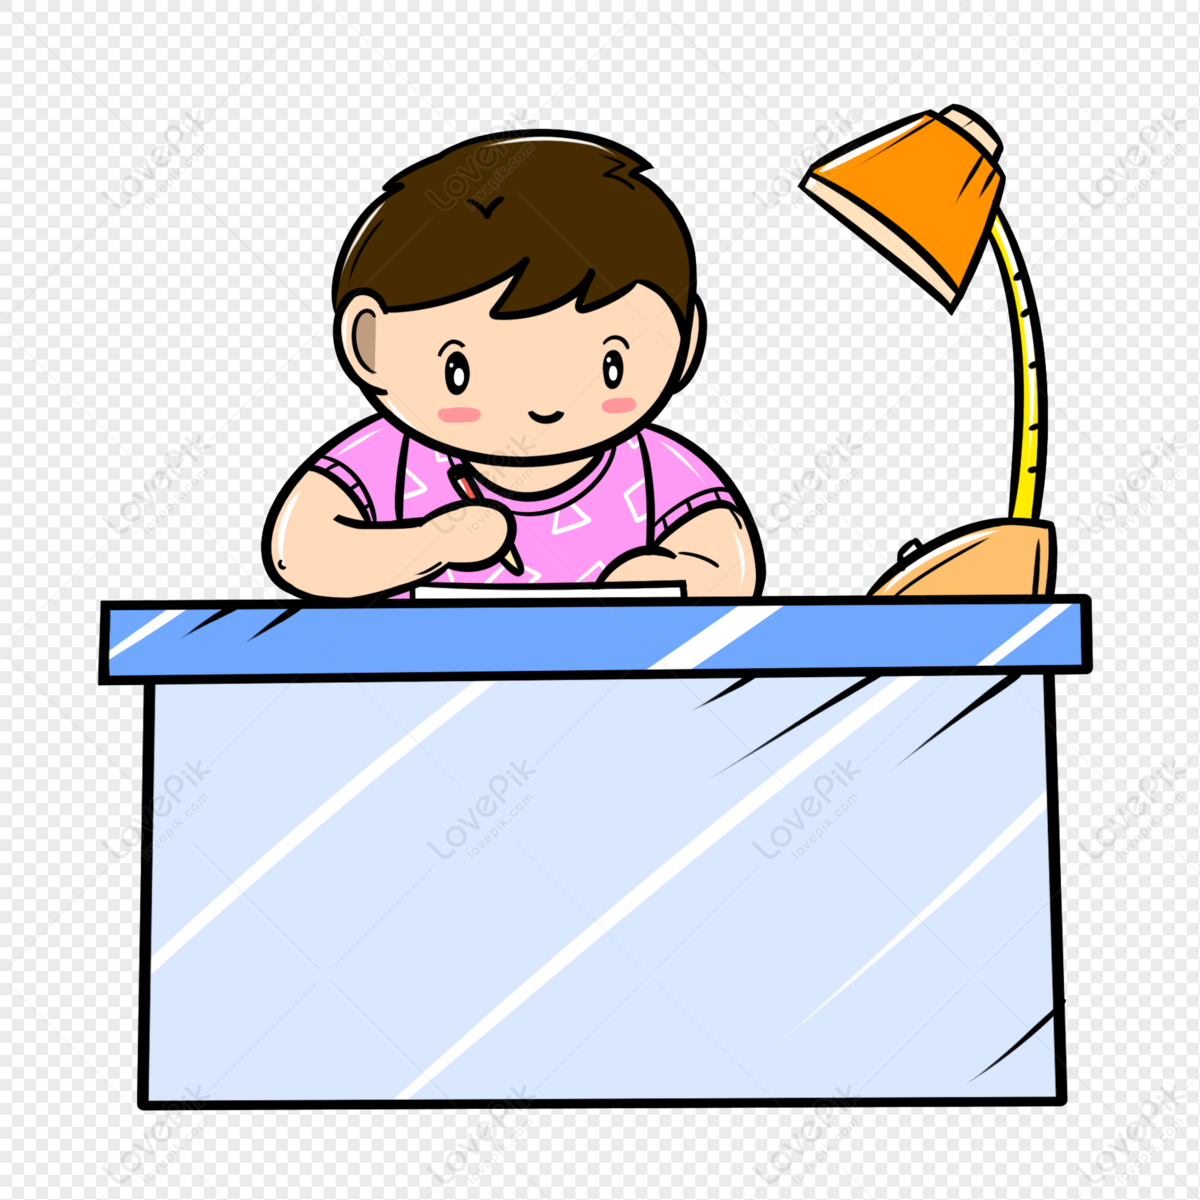 Little boy doing homework seriously during the school season, kids chores, and homework, children png transparent background